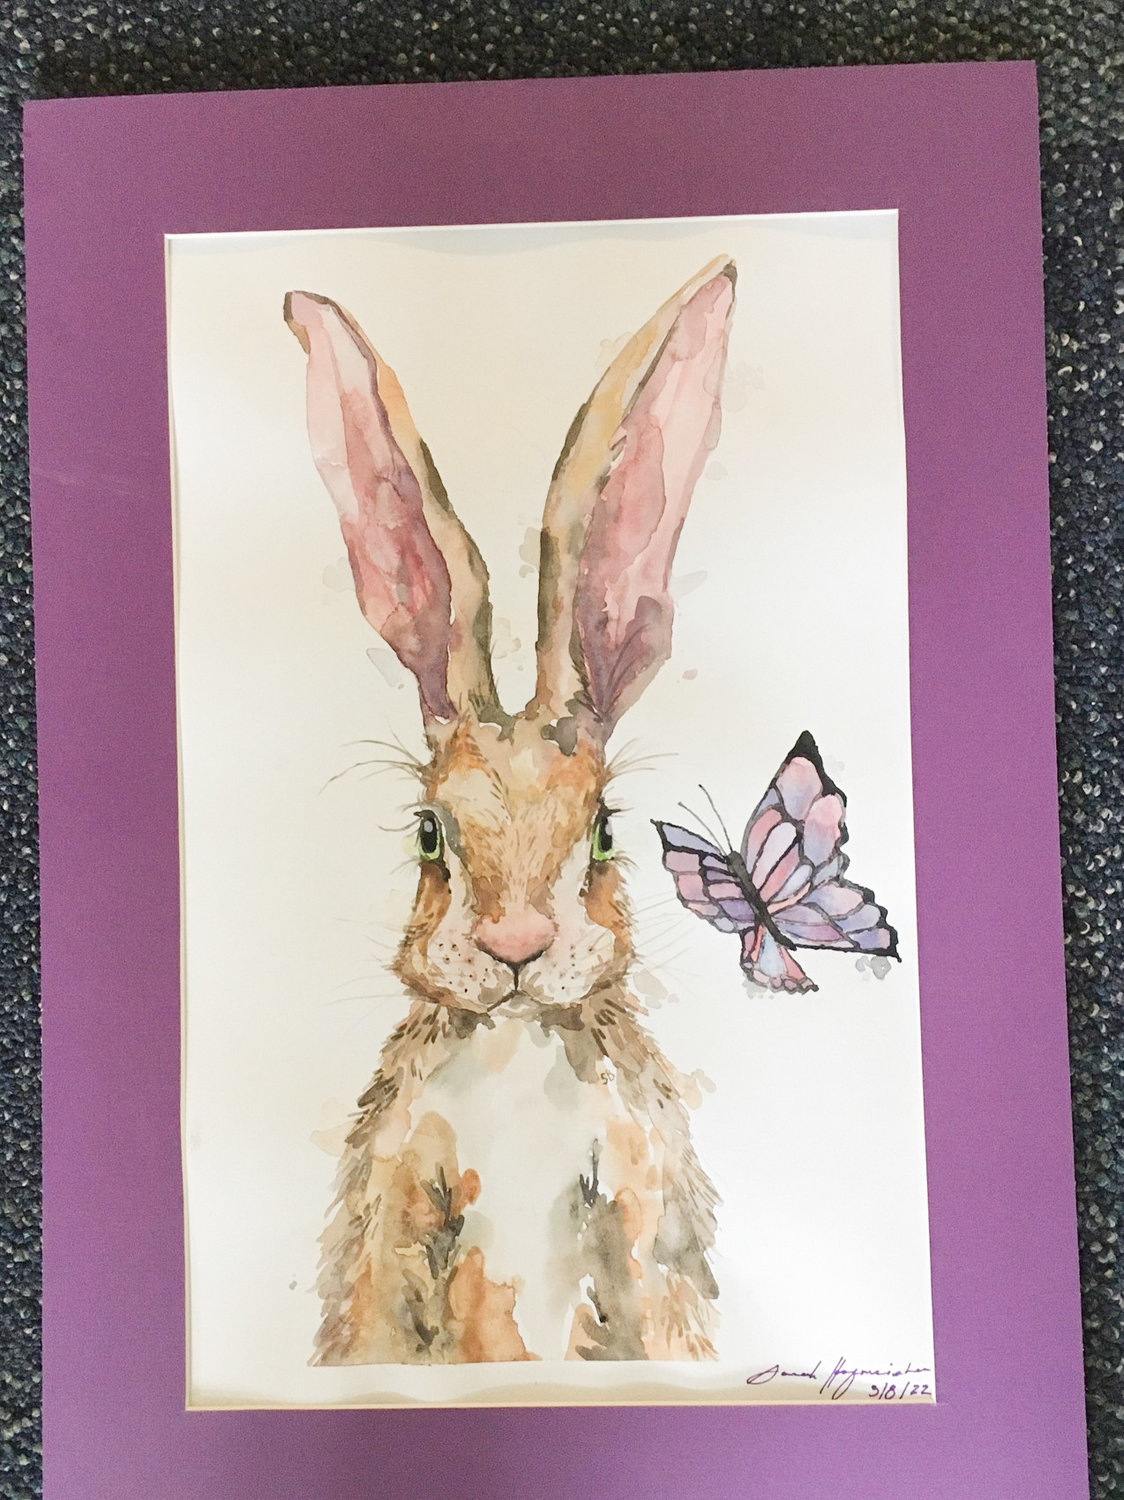 ART FOR SARAH — Students of Stockbridge Valley Central School’s seventh grade art class, studio art class, and photography class dedicated their pieces to the late Sarah Bennati, who taught all three classes over her 20-plus year career at Stockbridge.